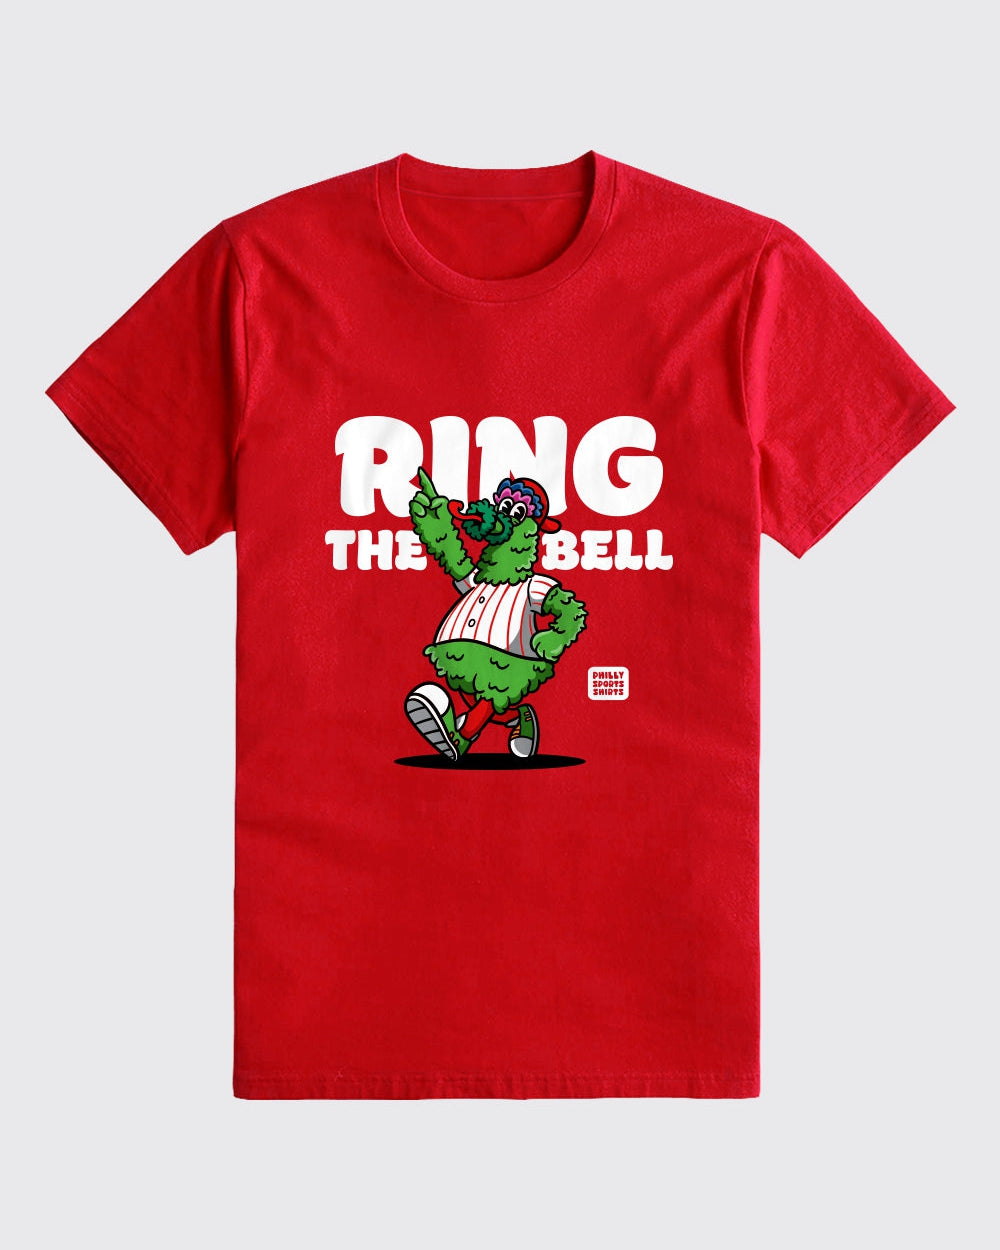 Philadelphia Phillies The Philly Ring The Bell Shirt - teejeep